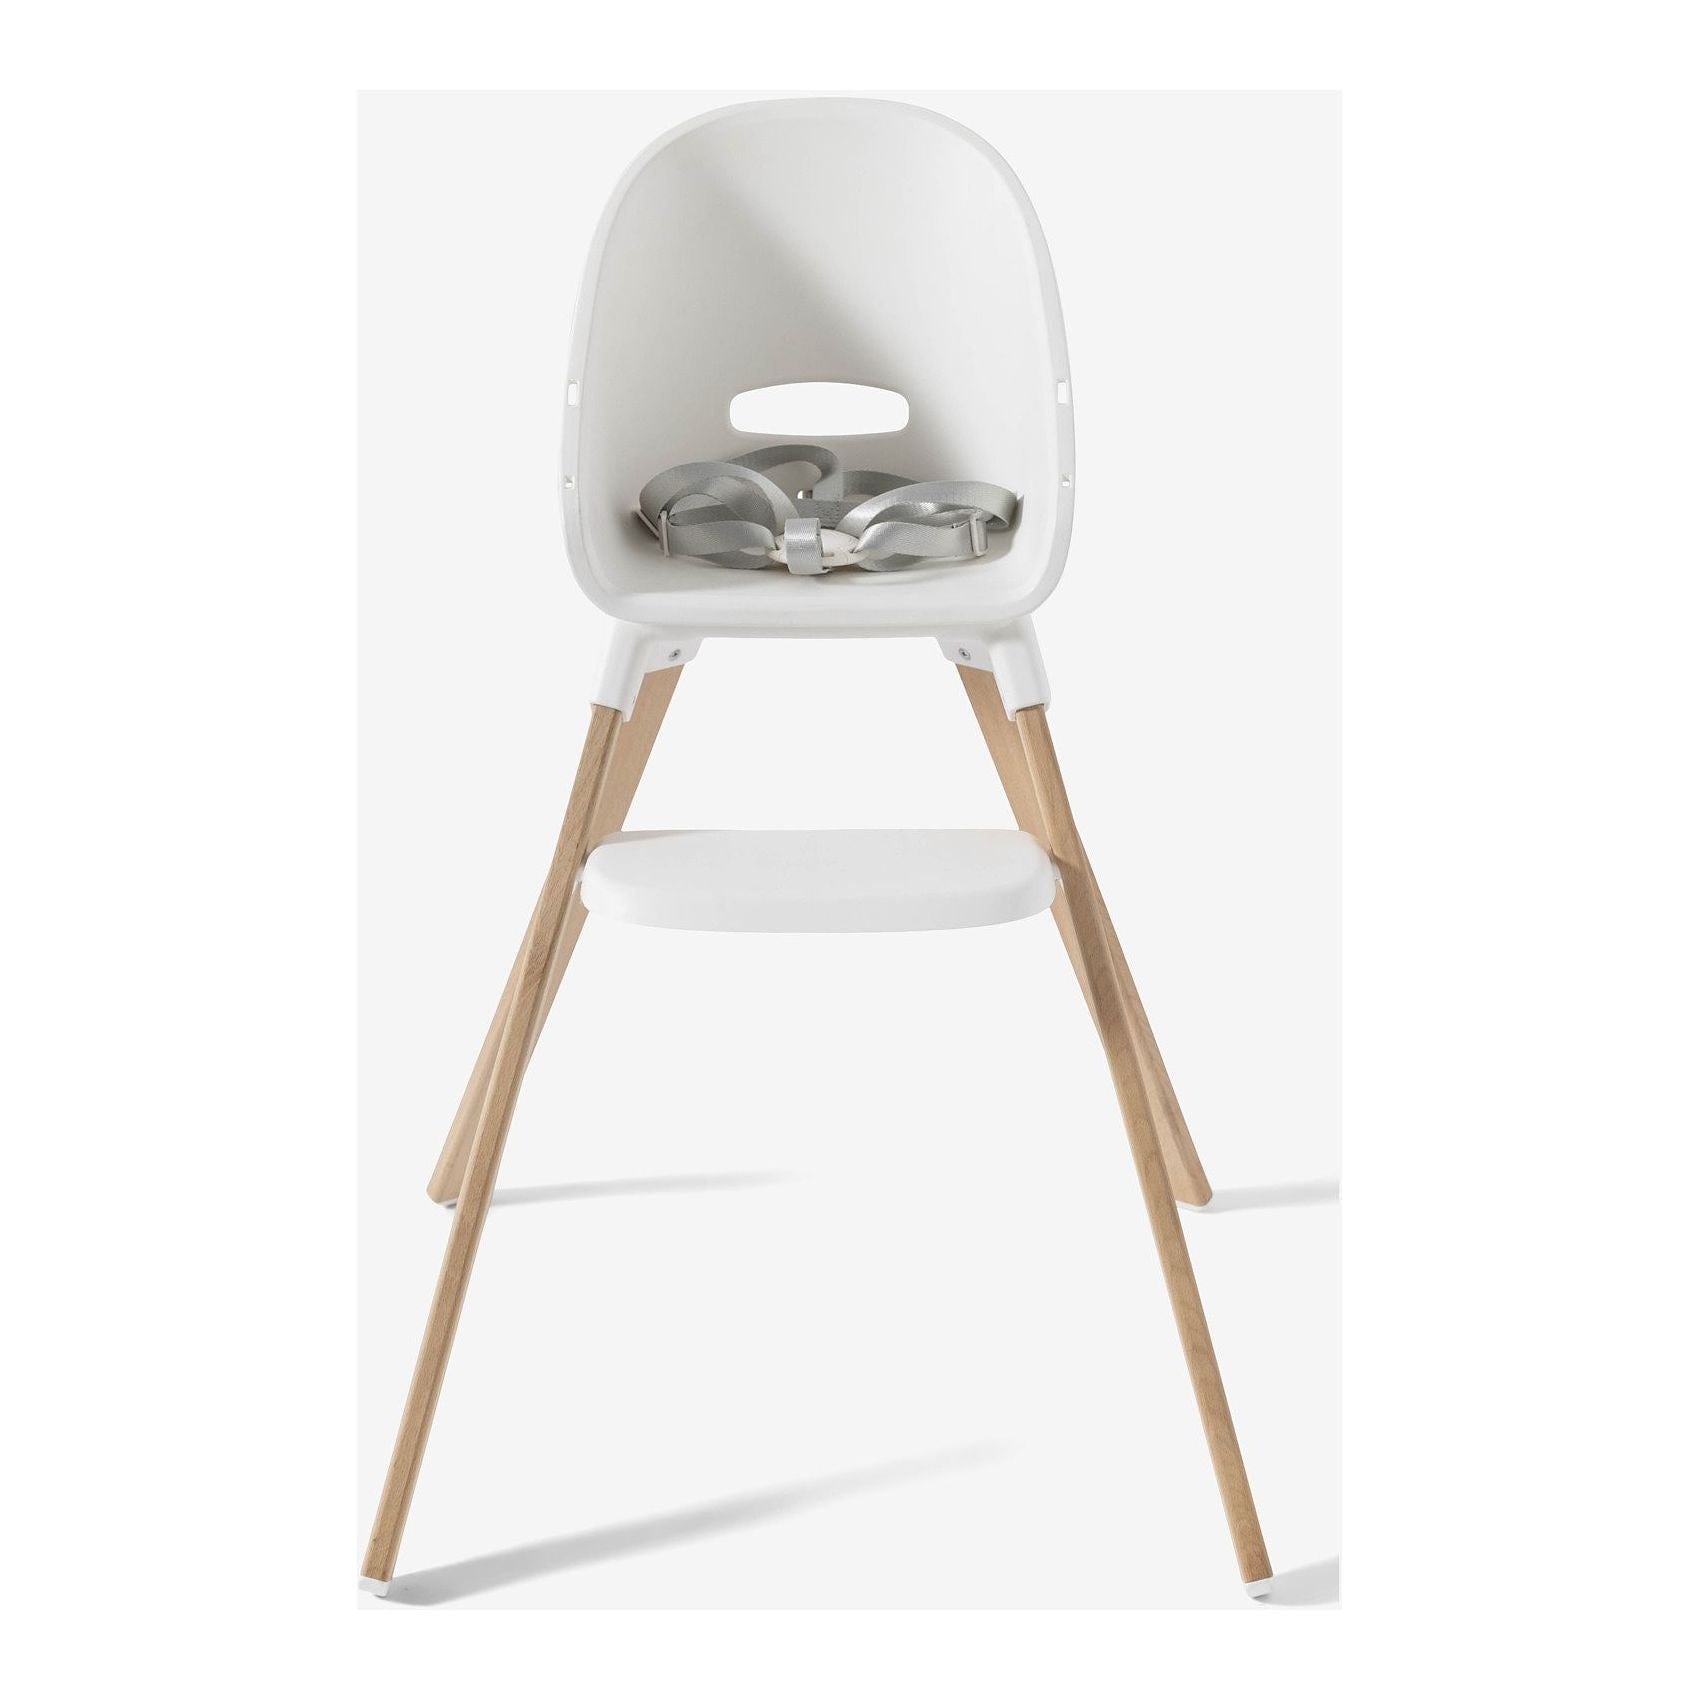 Twistshake Baby Feeding Highchair White Age- 12 Months to 3 Years (Holds upto 15 Kg)